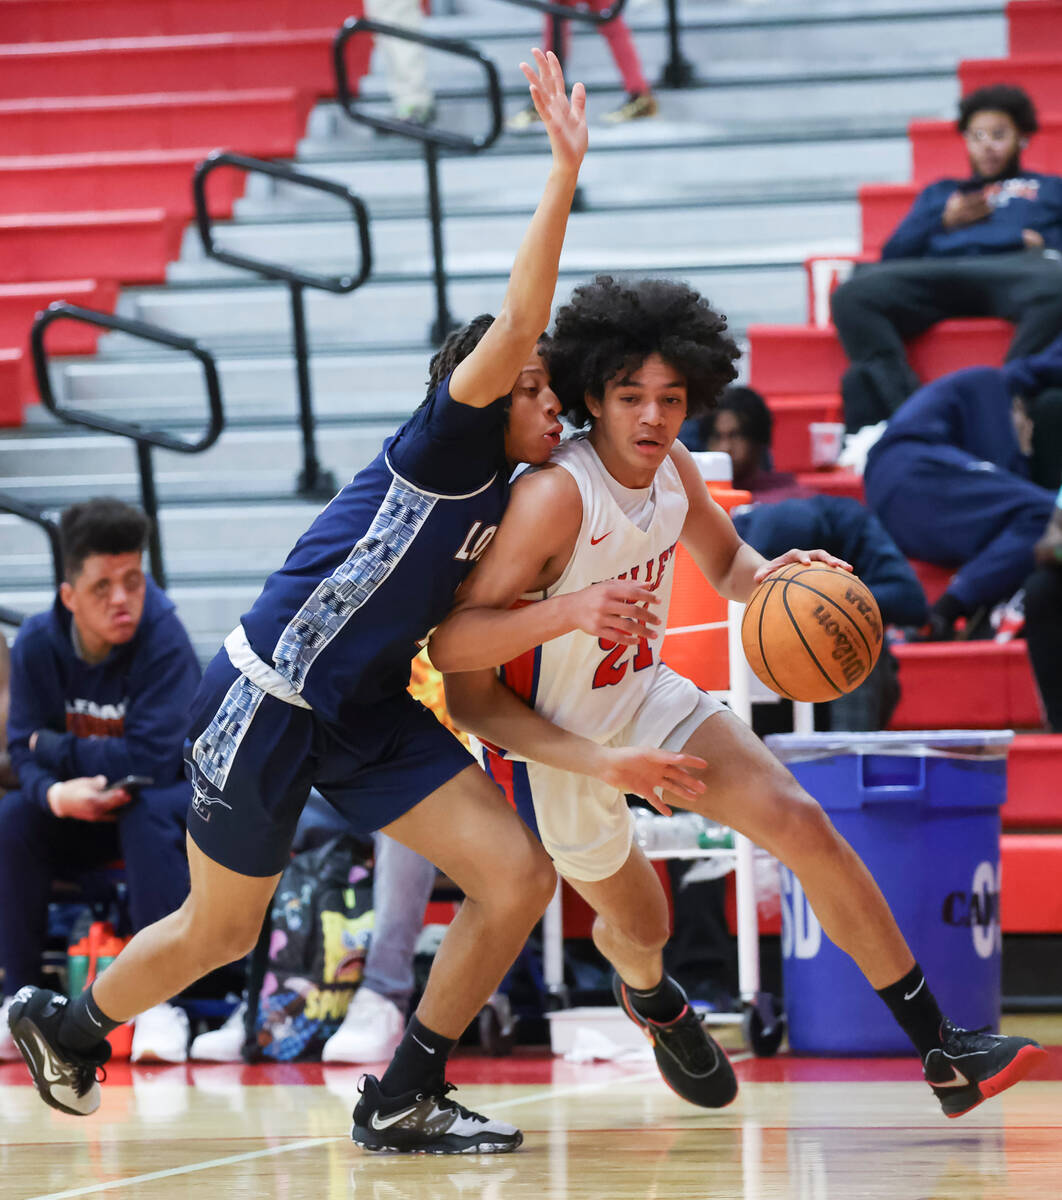 Valley's Kevan Wilkins (21) drives to the basket against Legacy's Ja'Merion Brass (11) during t ...